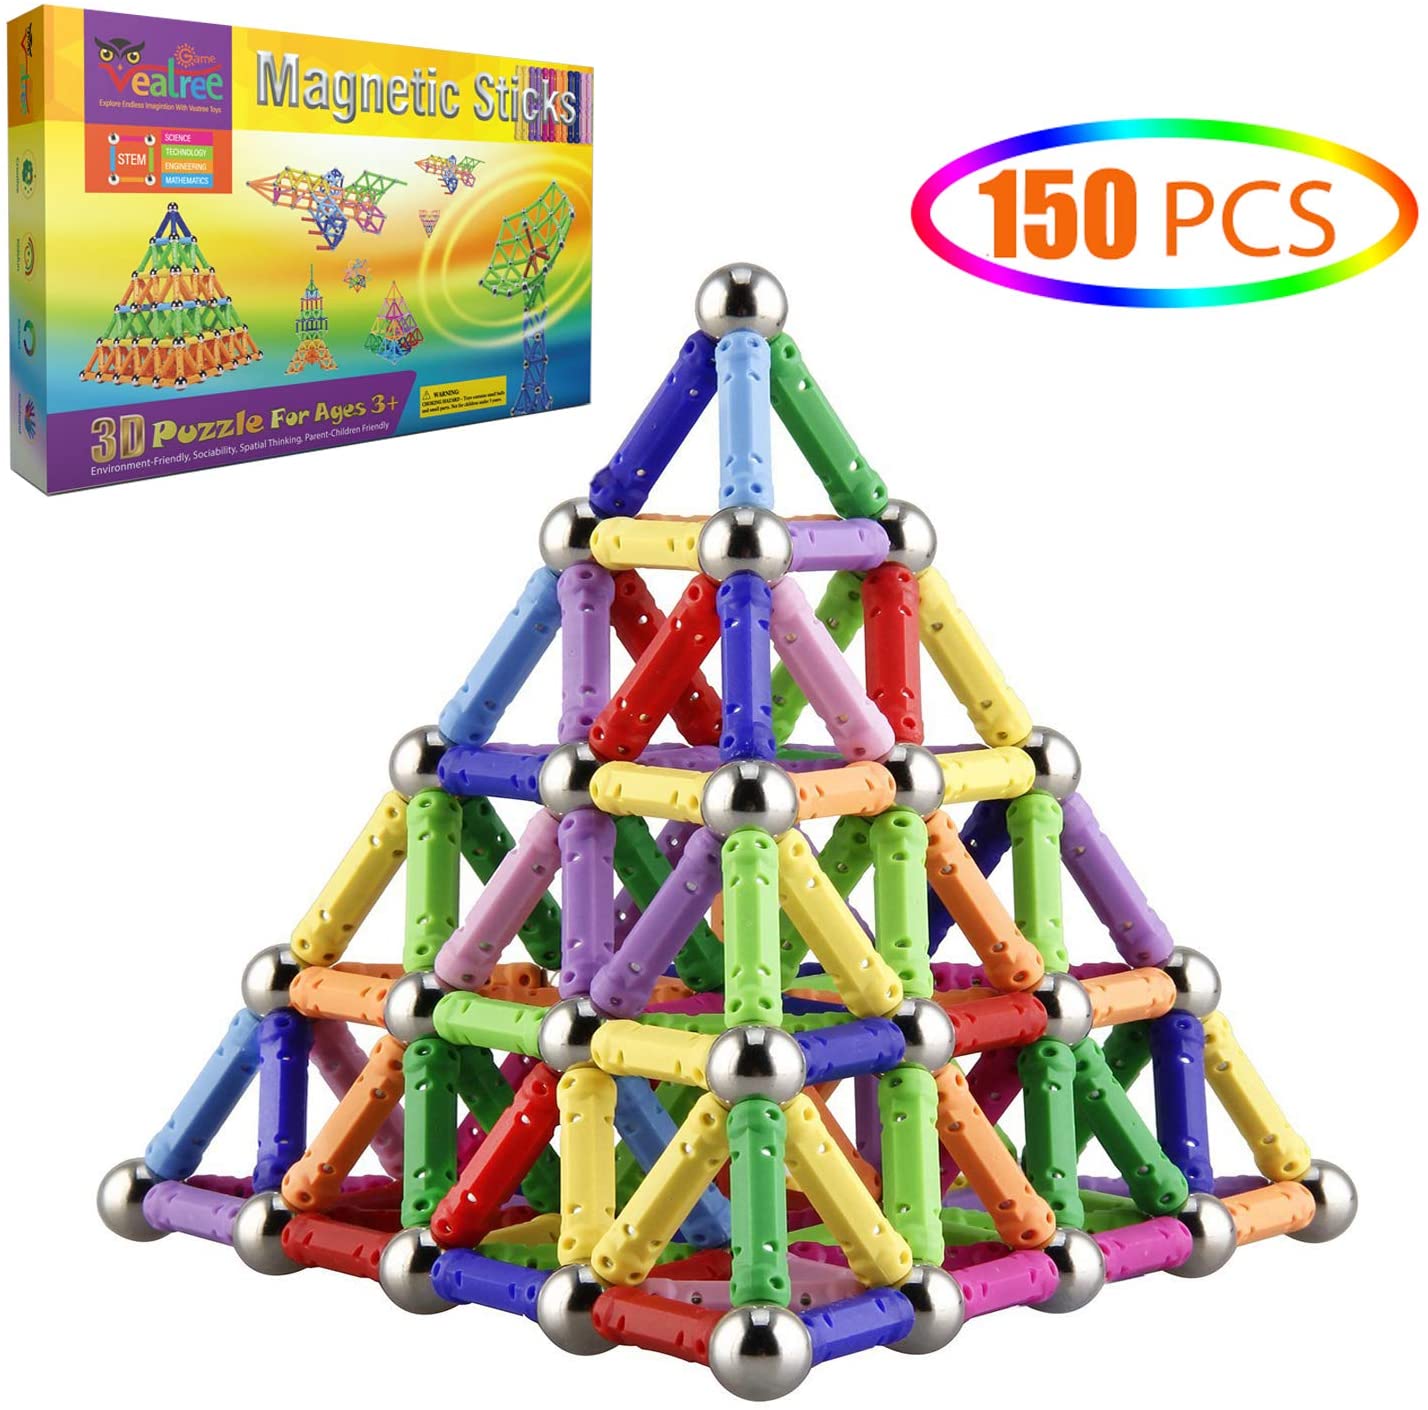 Veatree 308 Pieces Magnetic Building Blocks Toys Color Random Magnet Construction Build Kit Education Toys 3D Puzzle for Kids Playing Stacking Game with Magnetic Bricks and Sticks 